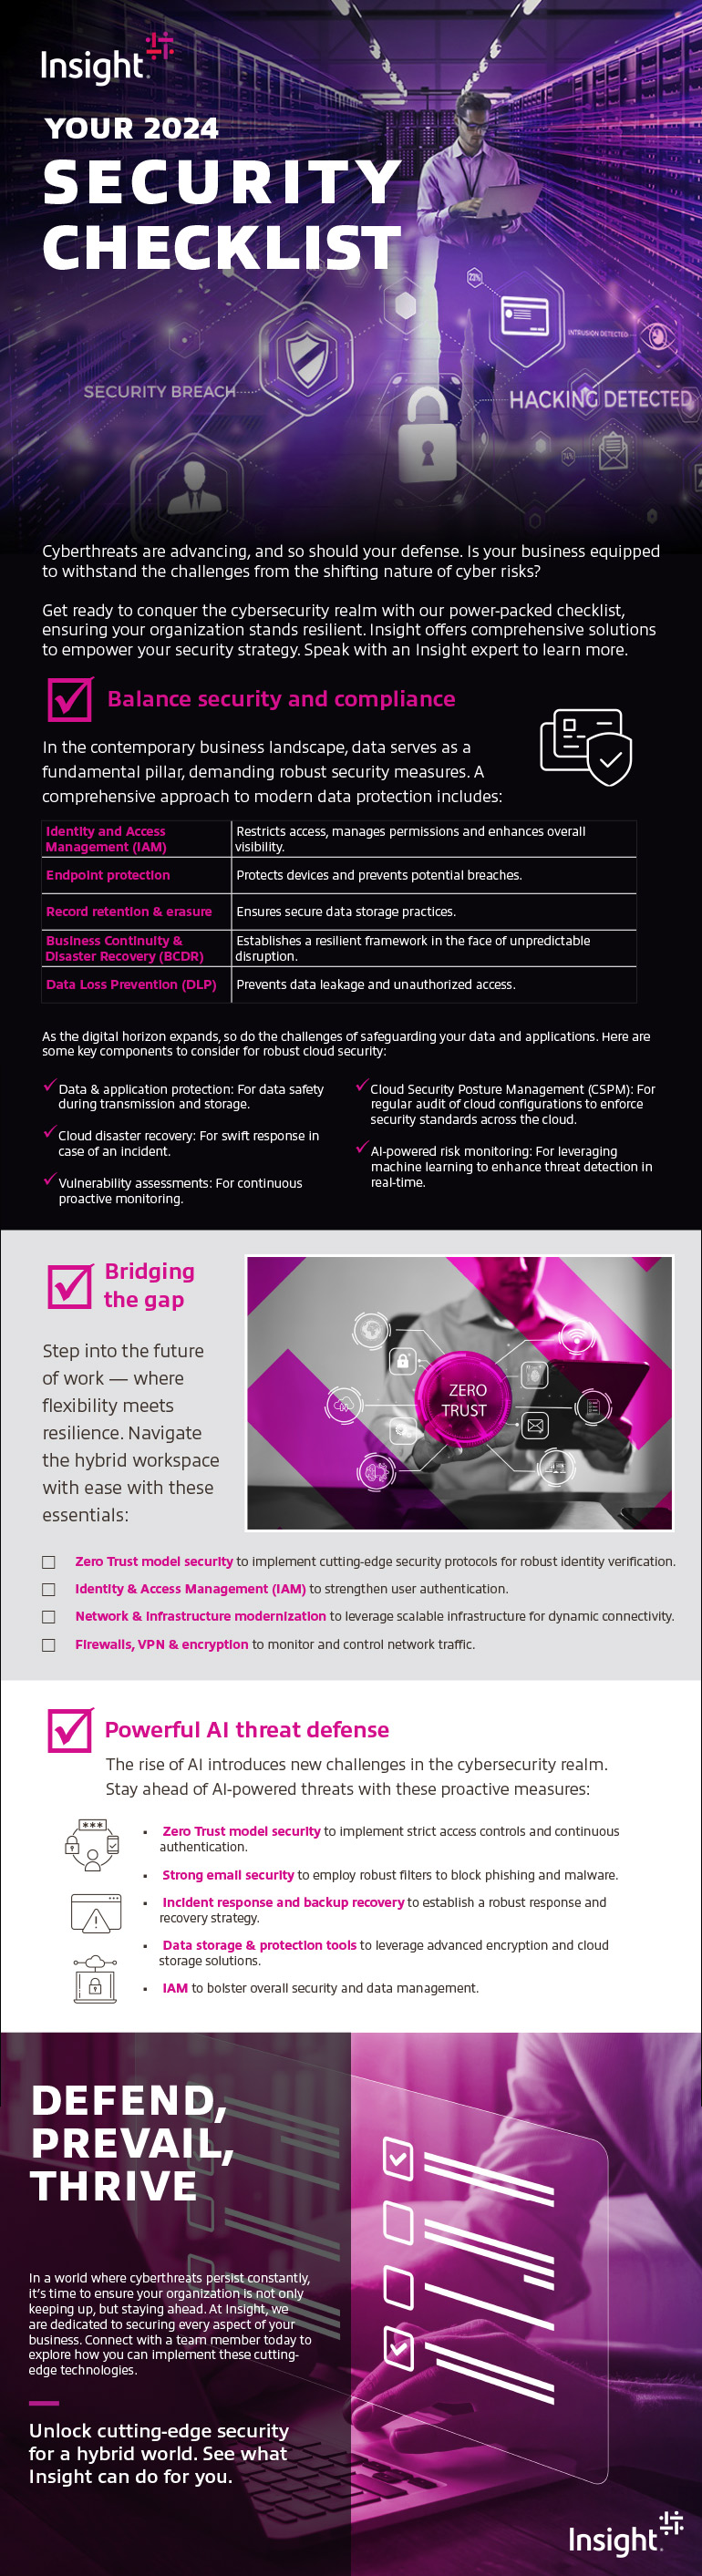 Your 2024 Security Checklist infographic